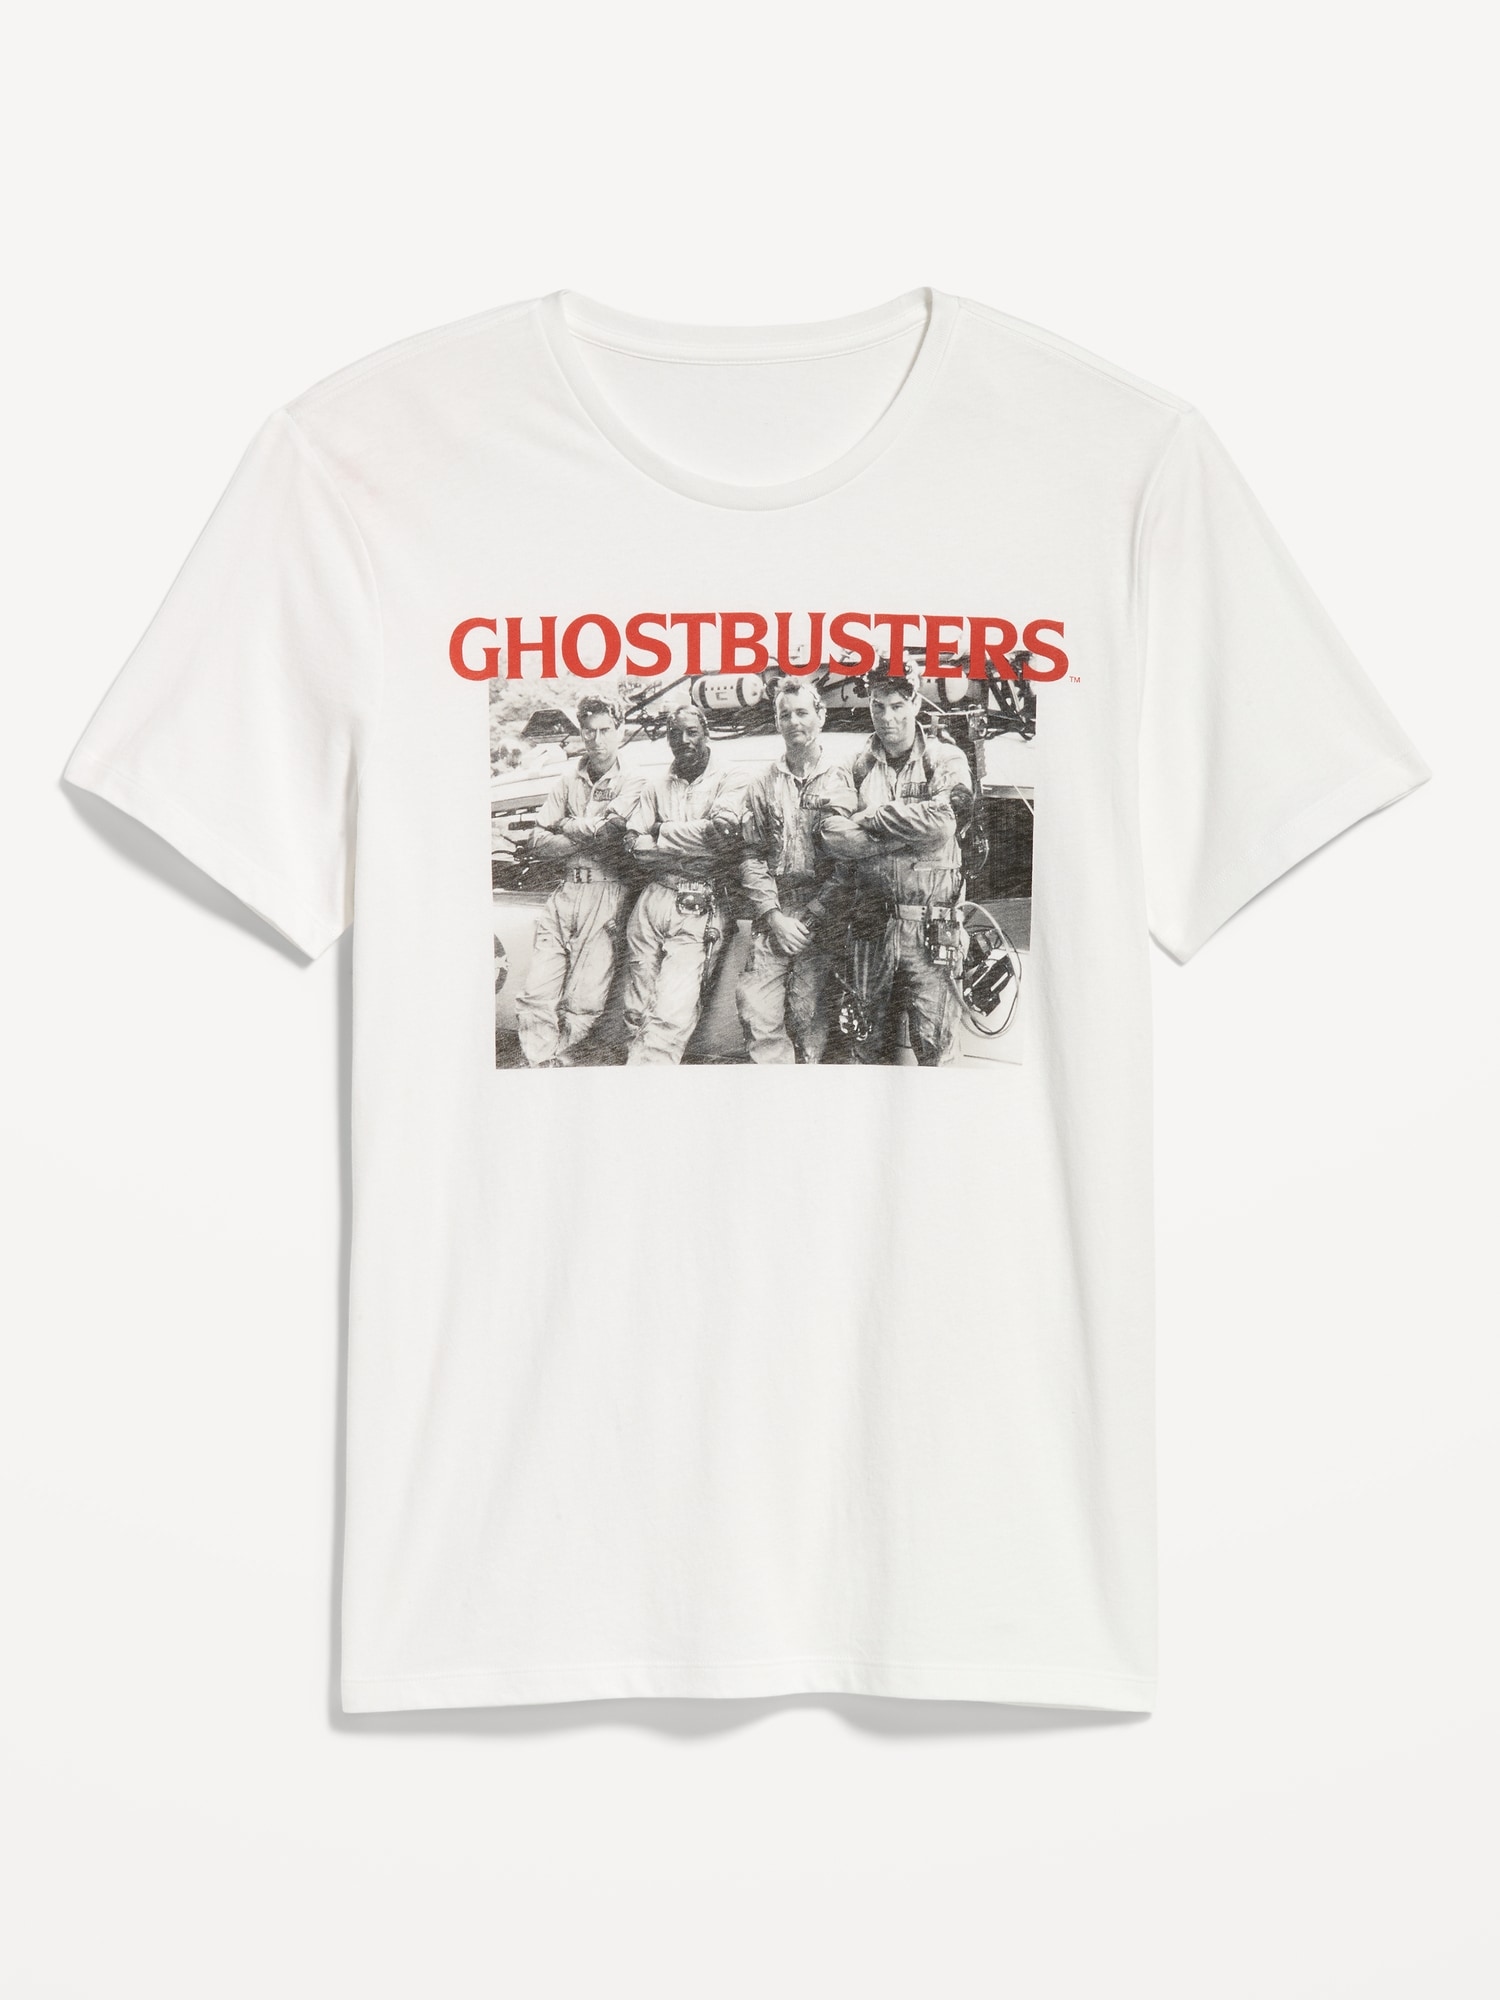 Ghostbusters Gender-Neutral T-Shirt for Adults